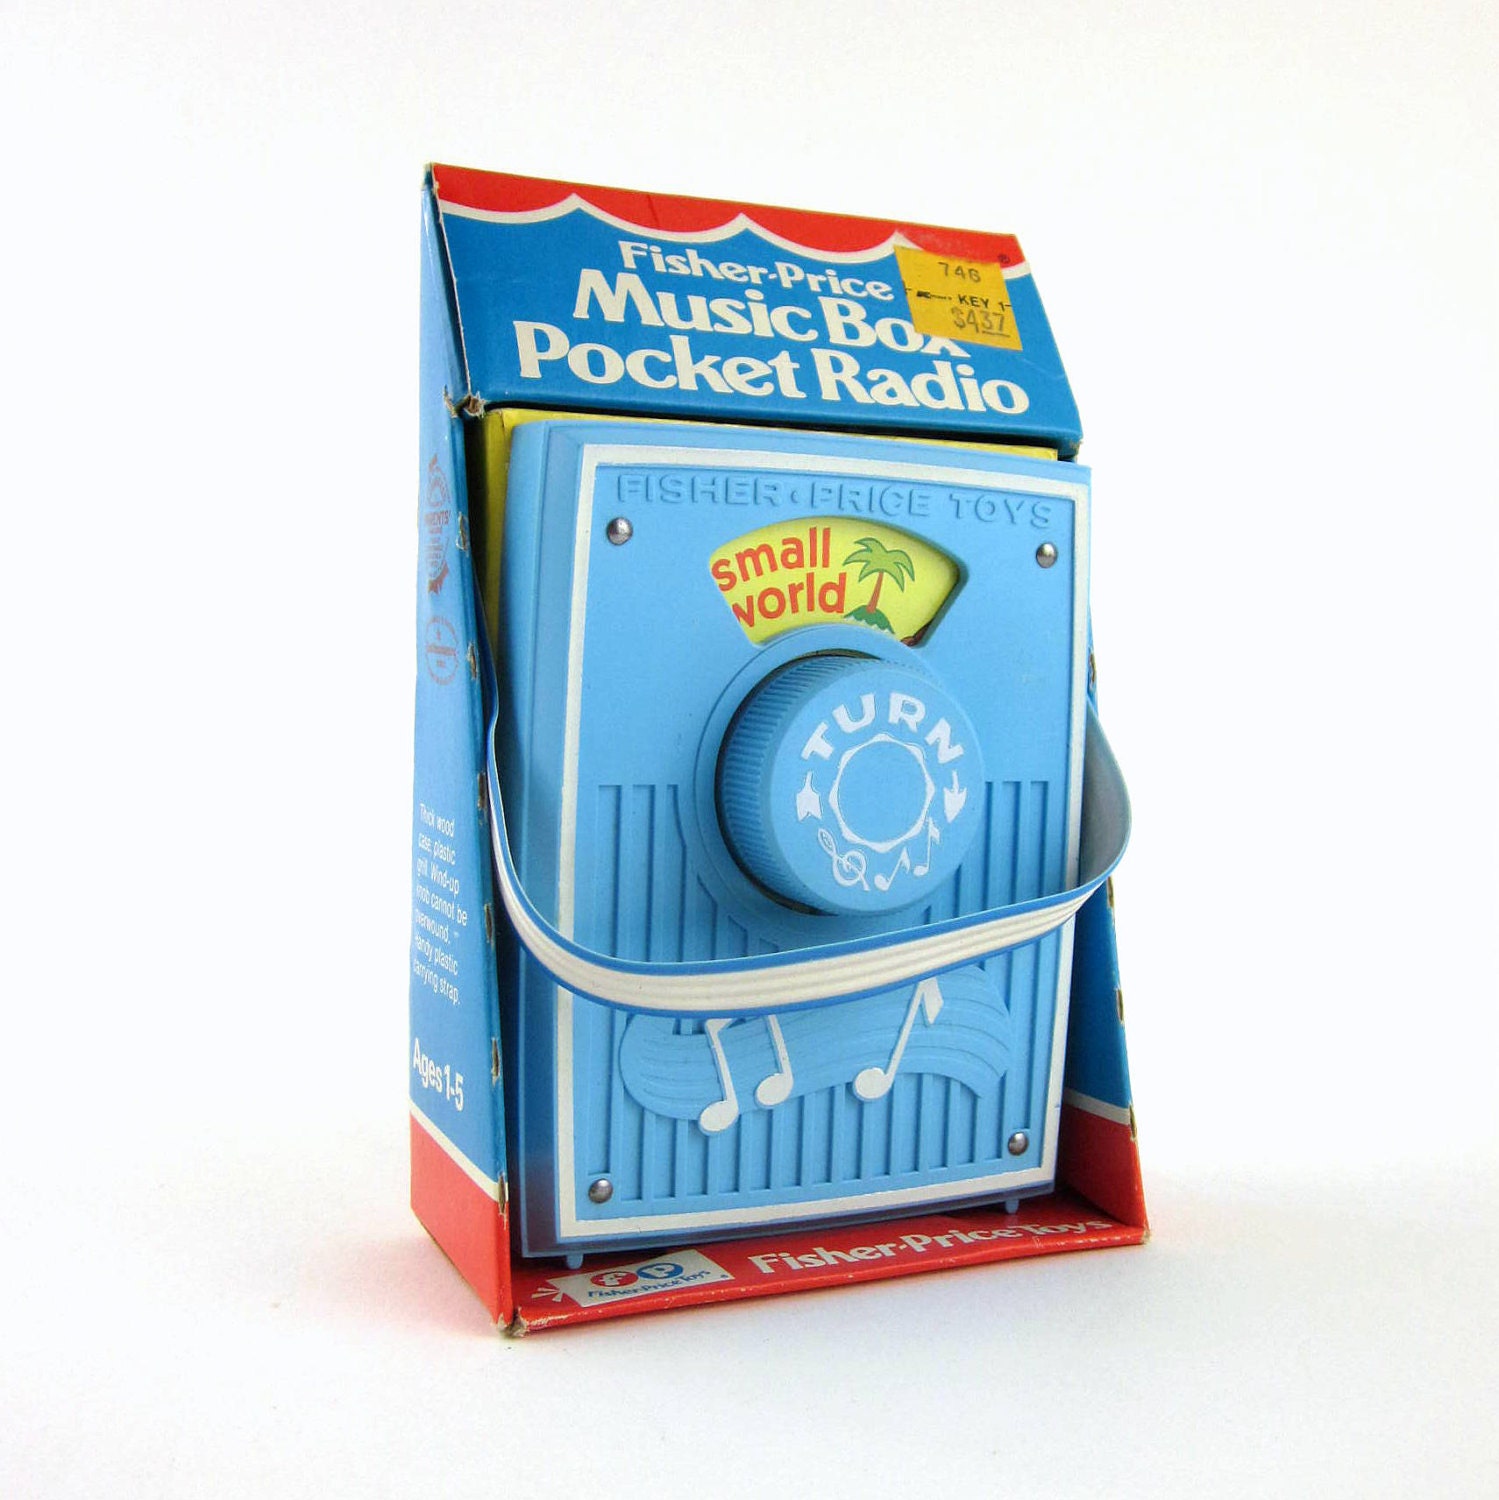 Fisher Price Music Box Pocket Radio in Box 1977 / It's A Small World Tune / Like-New Condition - AttysSproutVintage